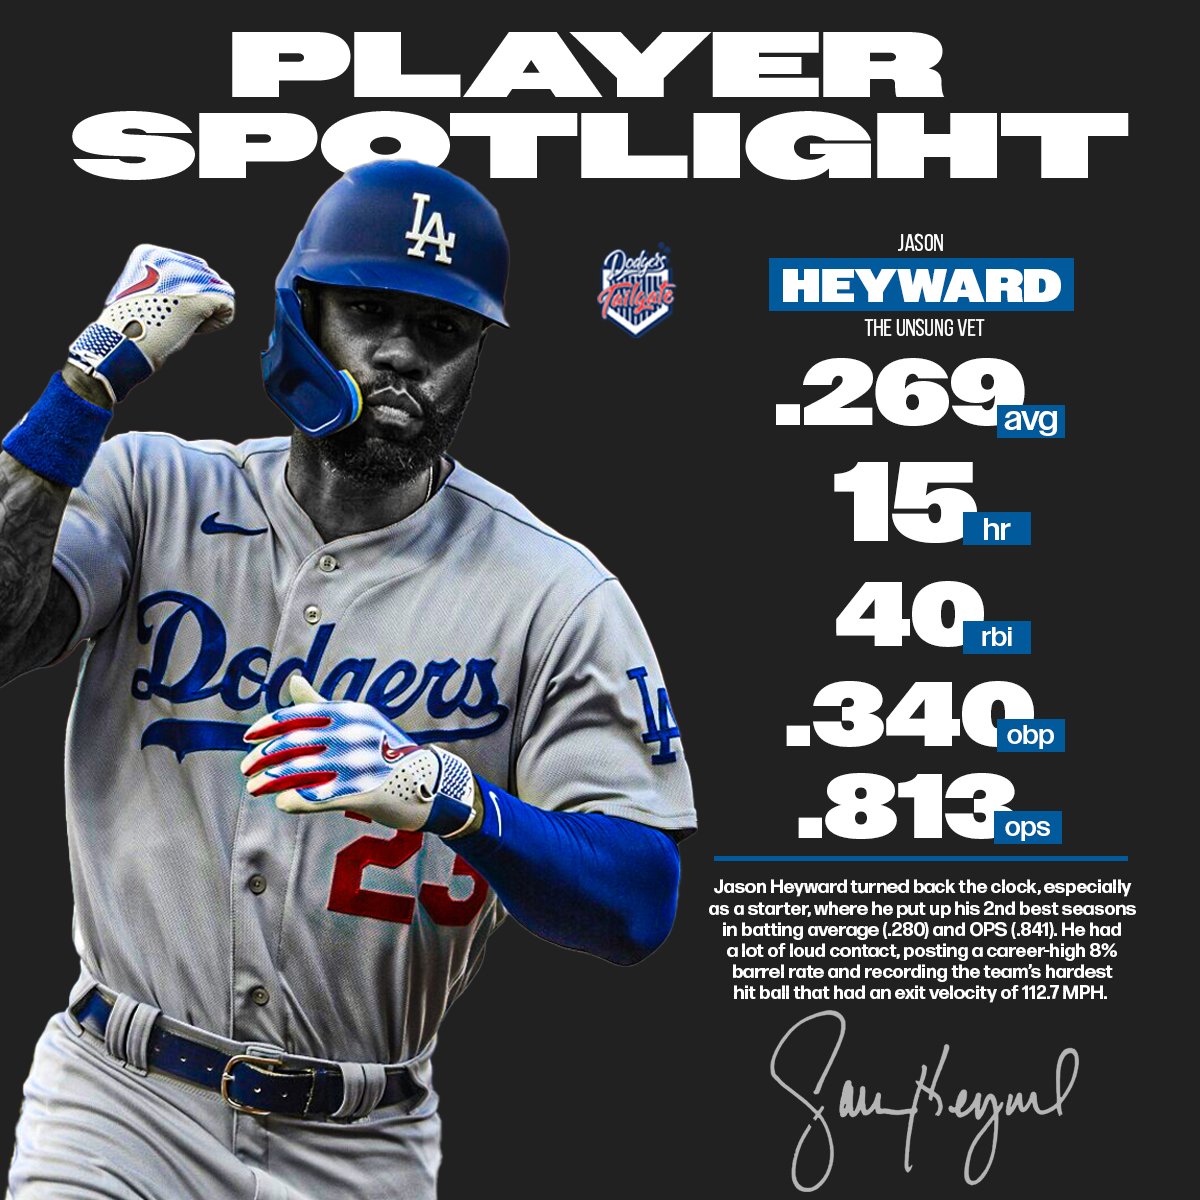 Jason Heyward found the fountain of youth in Los Angeles. #LetsGoDodgers